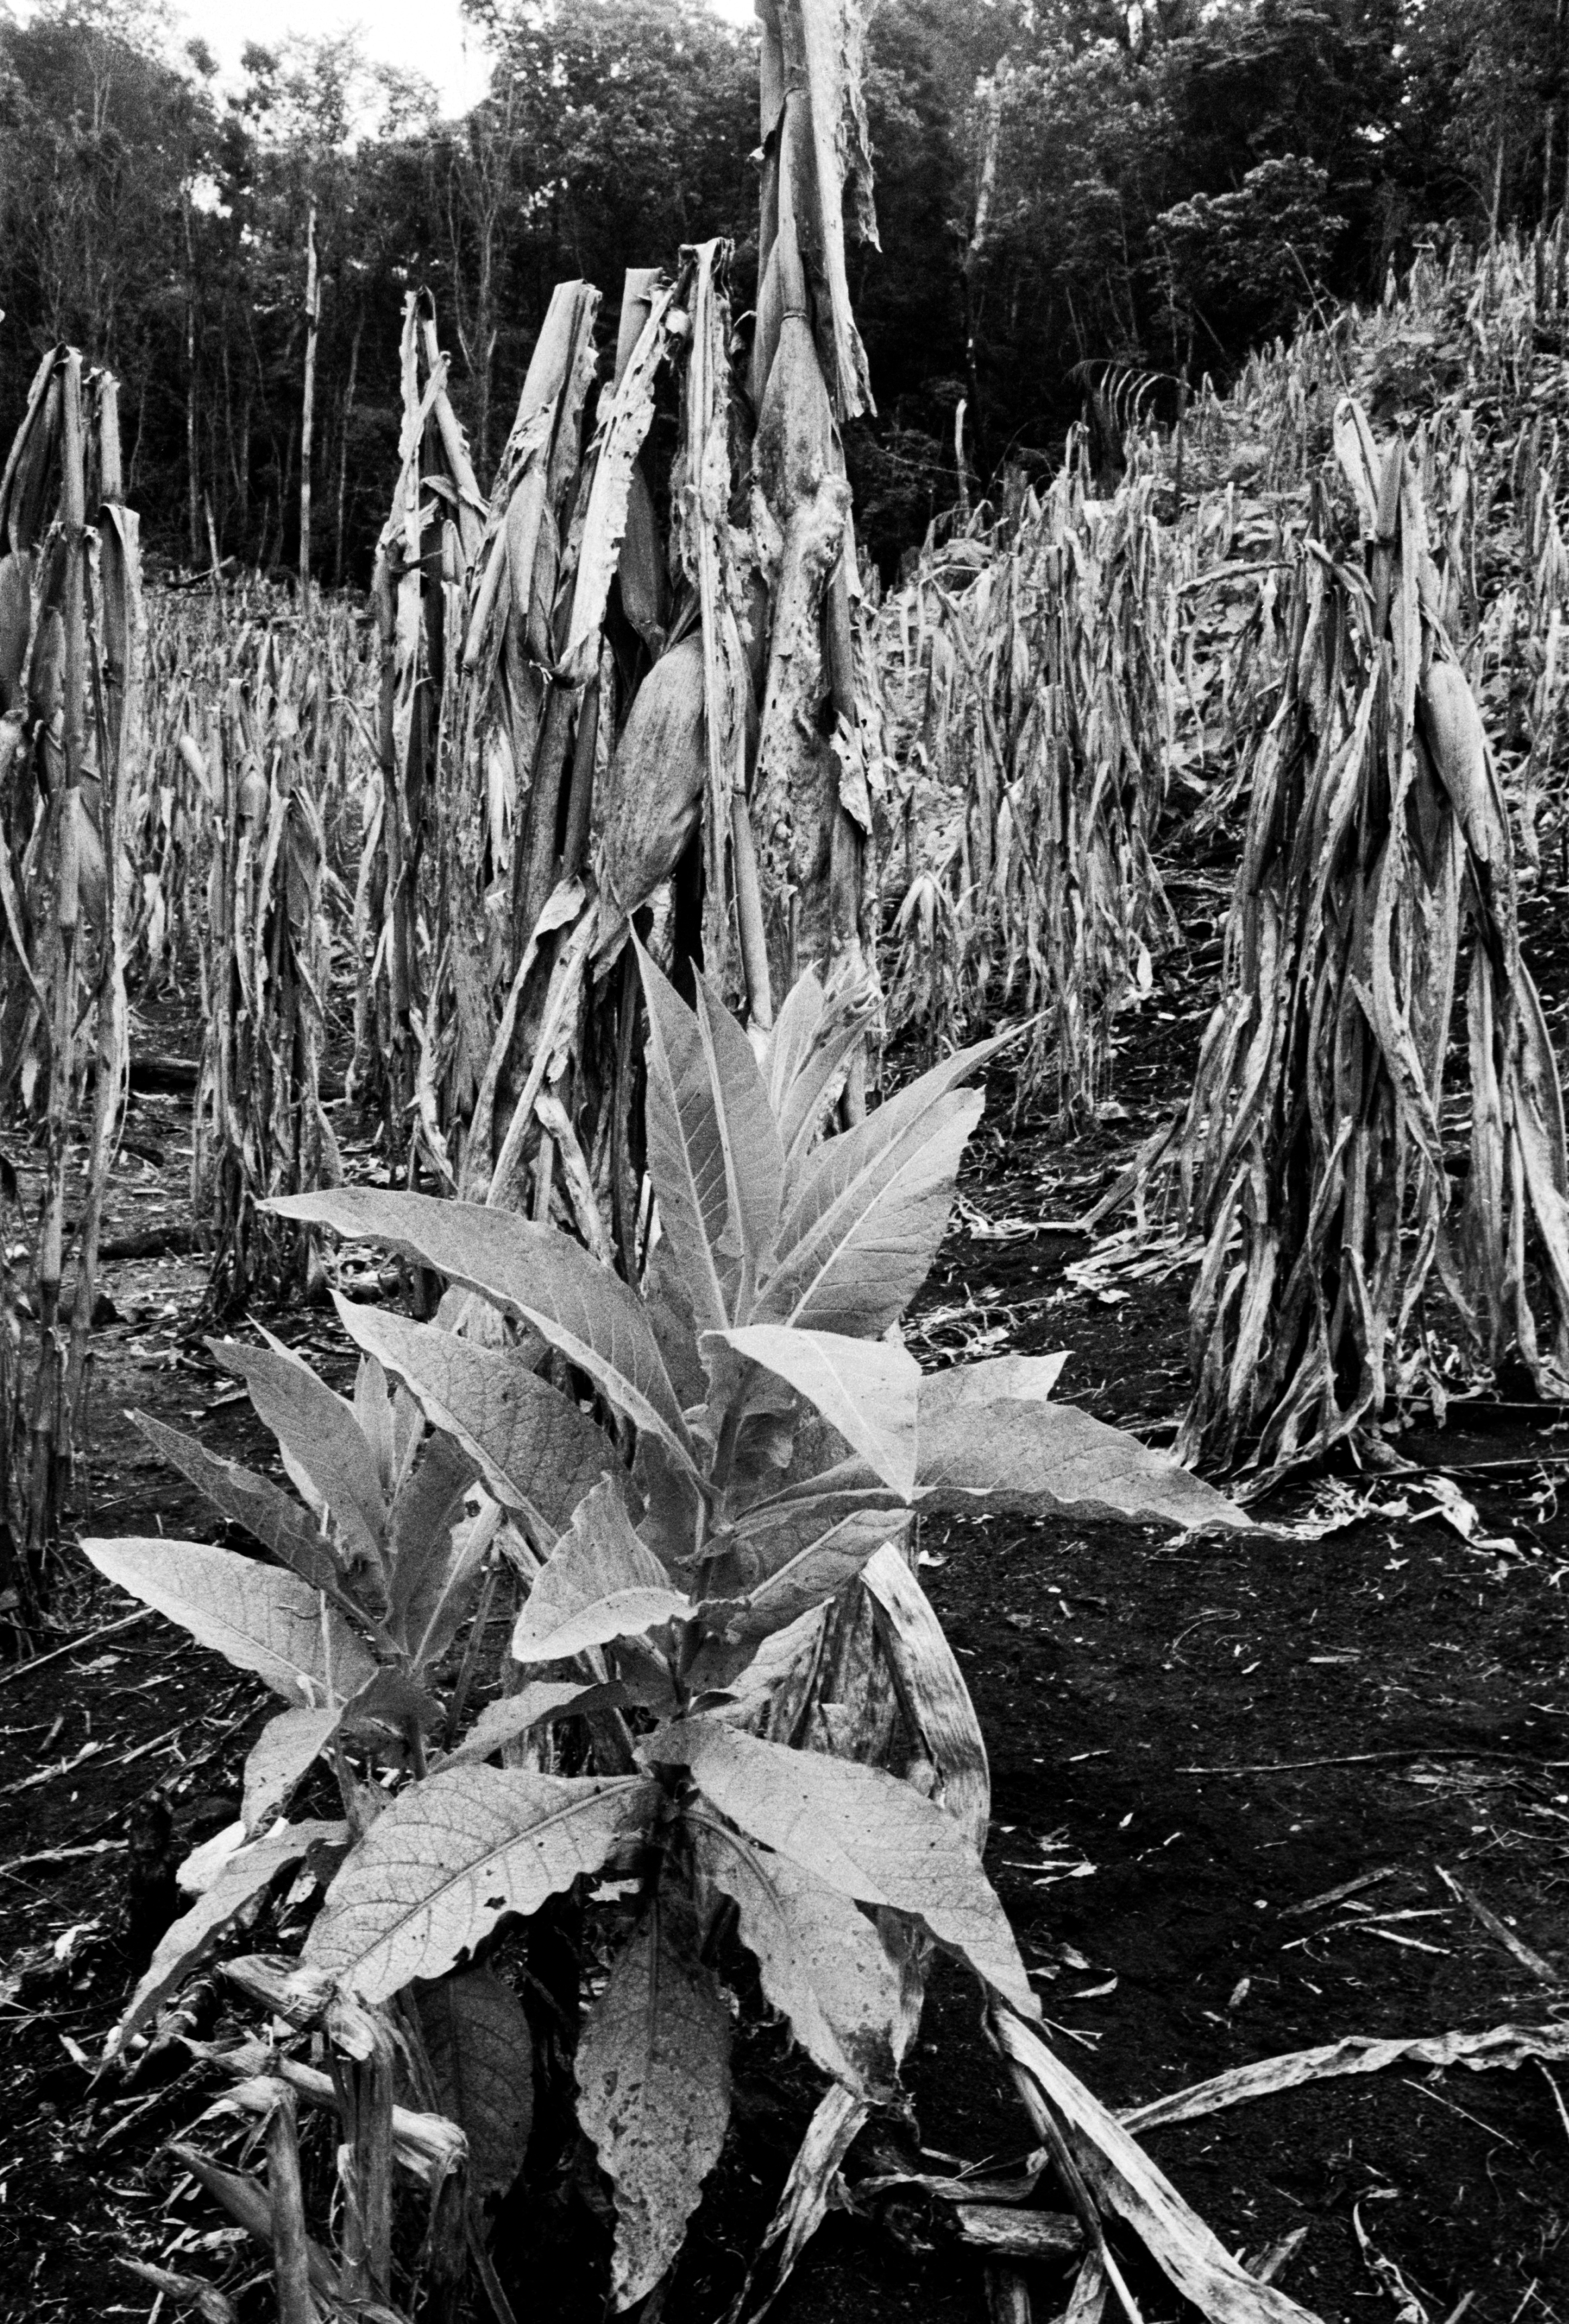  Tobacco growing alongside the trinity crops of maize, squash and beans. Naha, Chiapas, Mexico 